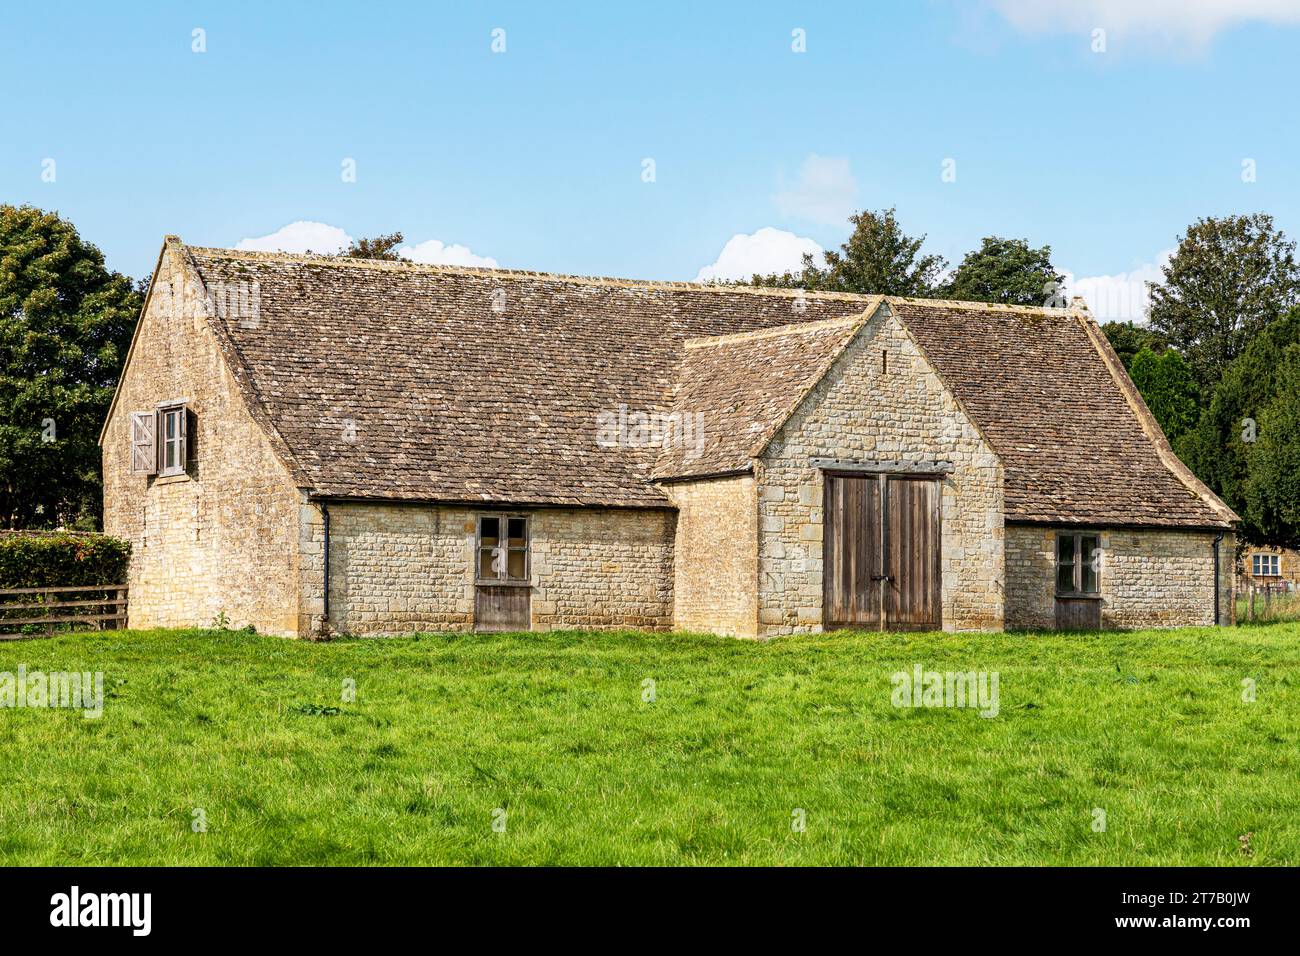 A traditional 18th century stone barn in the Cotswold village of Guiting Power, Gloucestershire, England UK Stock Photo